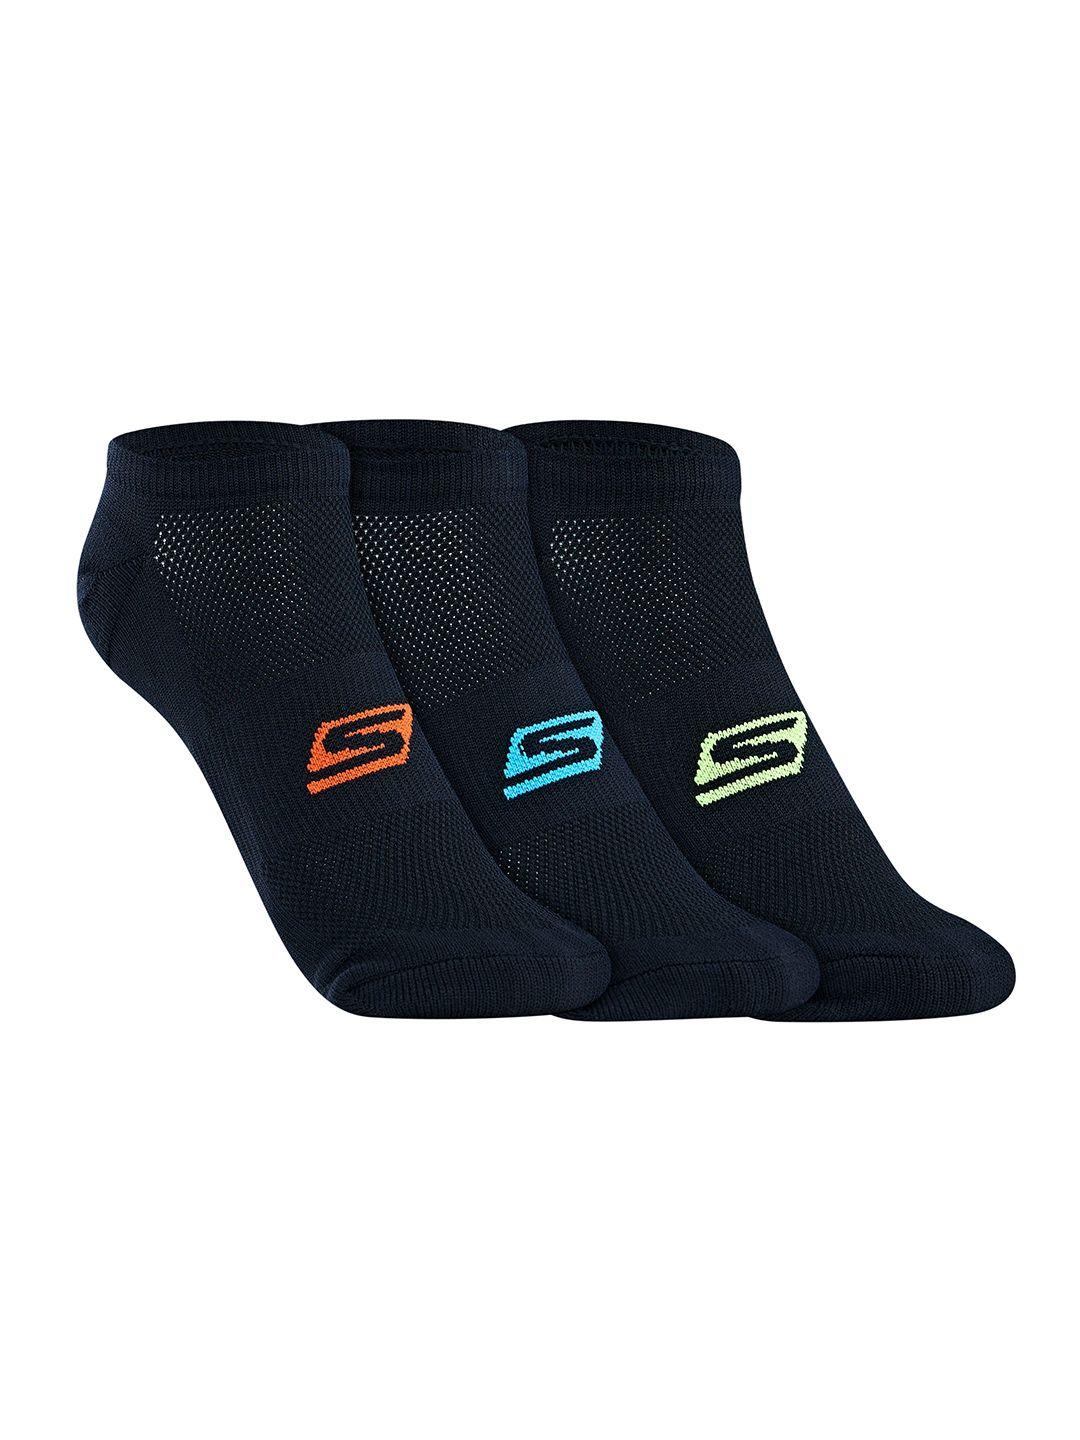 Skechers Women Pack Of 3 Patterned Non Terry Low Cut Ankle Length Socks